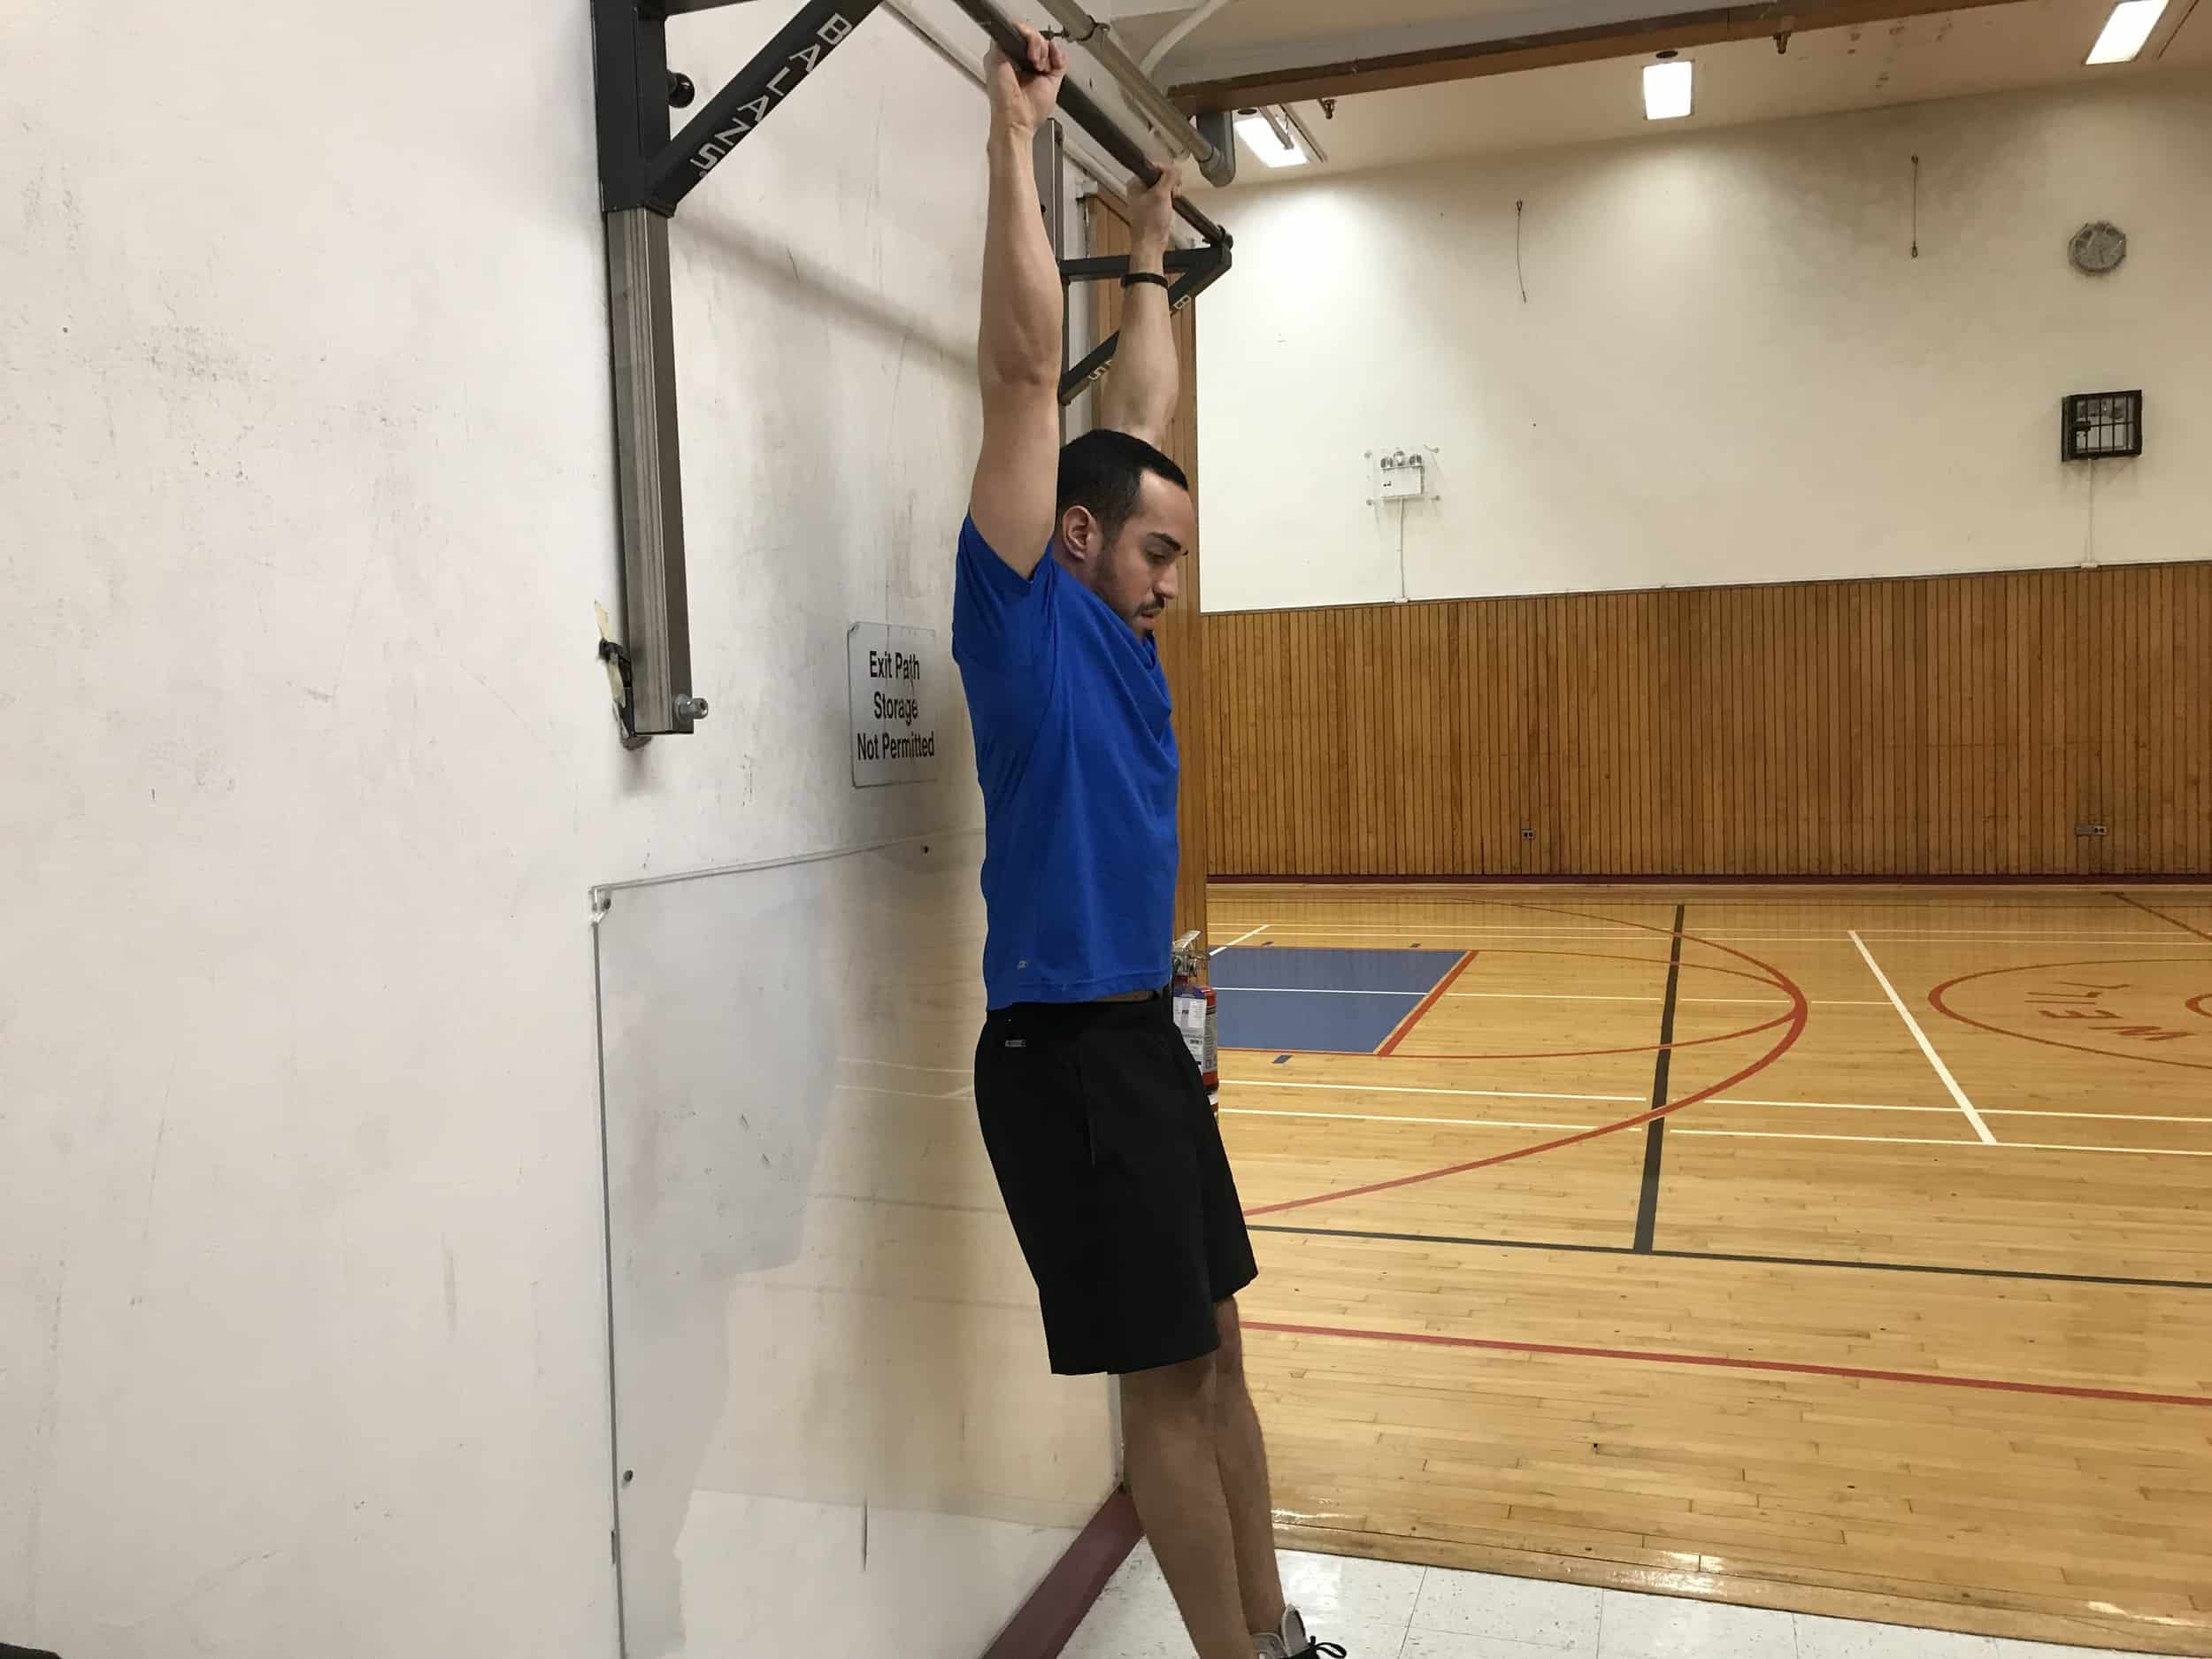 alex showing posterior pelvic tilt while hanging from a bar (lower back is neutral and feet are slightly forward)